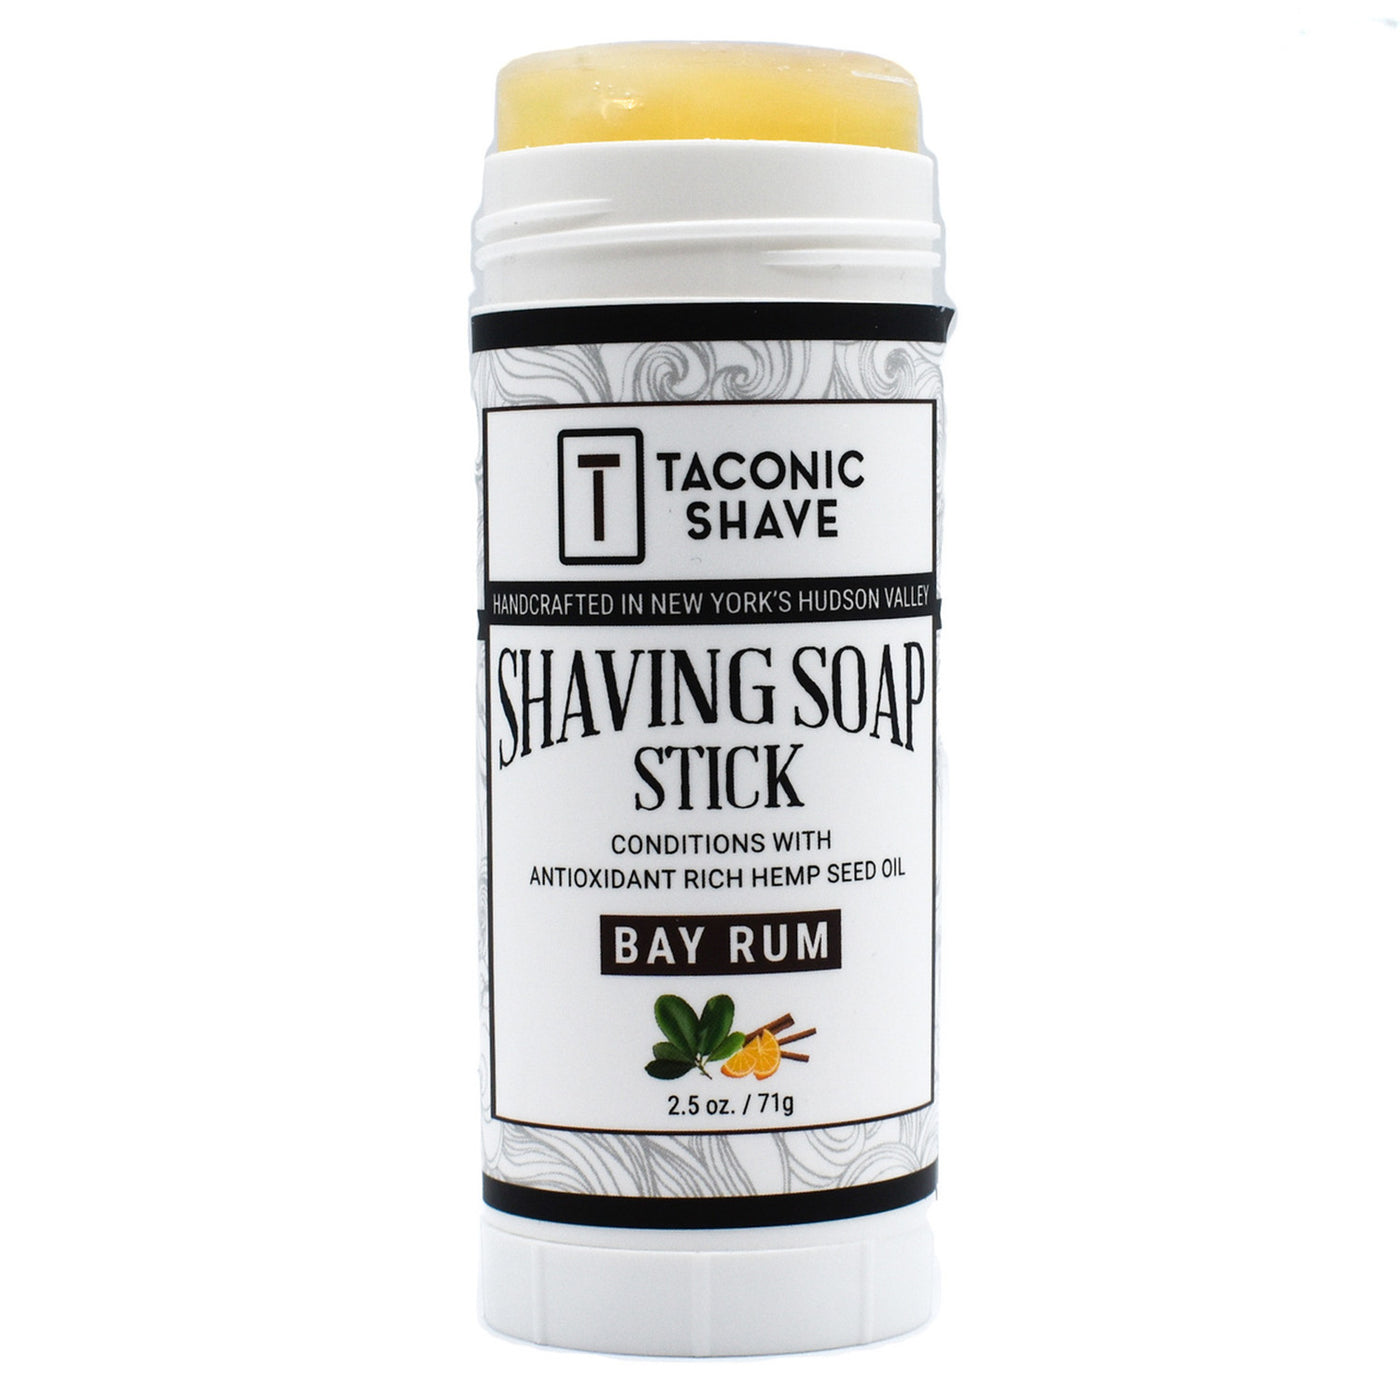  Taconic Shave Bay Rum Twist Up Shaving Soap Stick by Taconic Shave sold by Naked Armor Razors